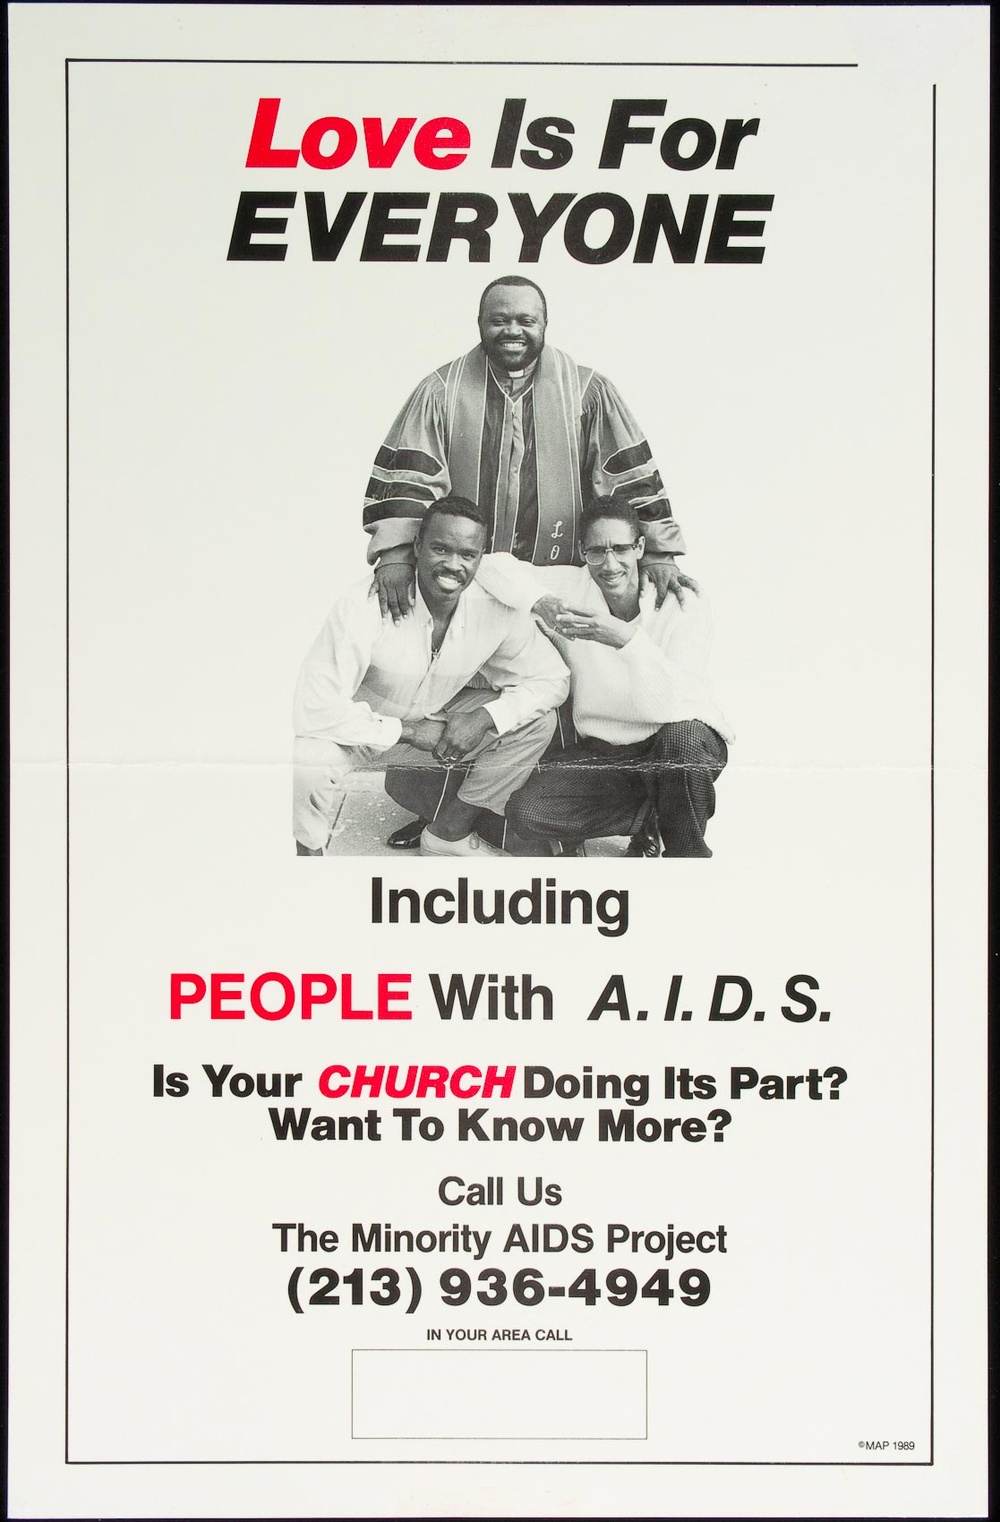 A poster that says "Love is for EVERYONE" with a Black man in a clergy robe smiling alongside two other Black men, below are informative texts about an AIDS project.